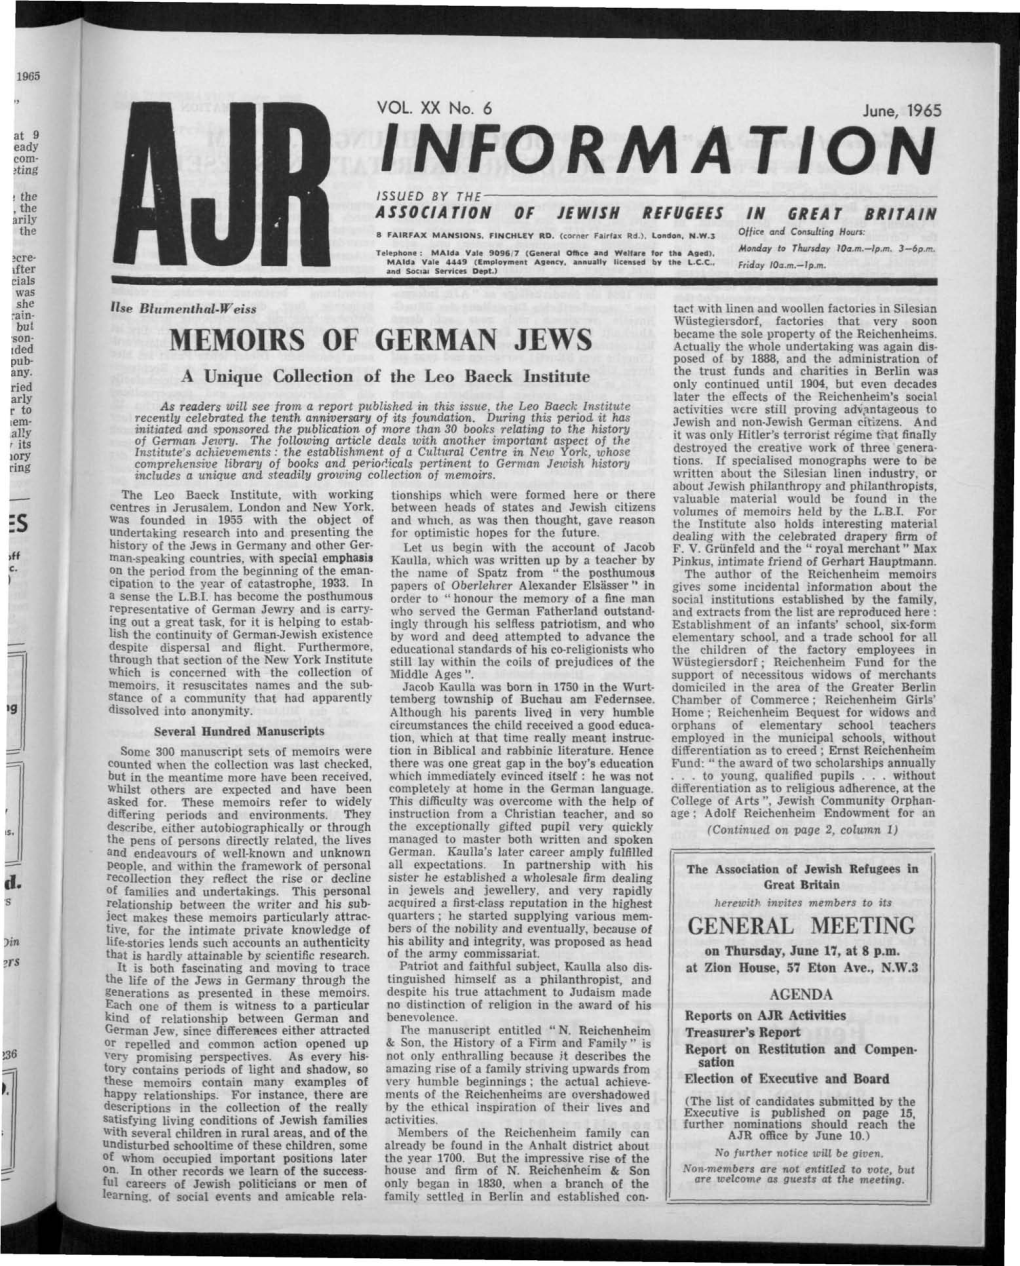 Information Issued by the — Association of Jewish Refugffs in Great Britain